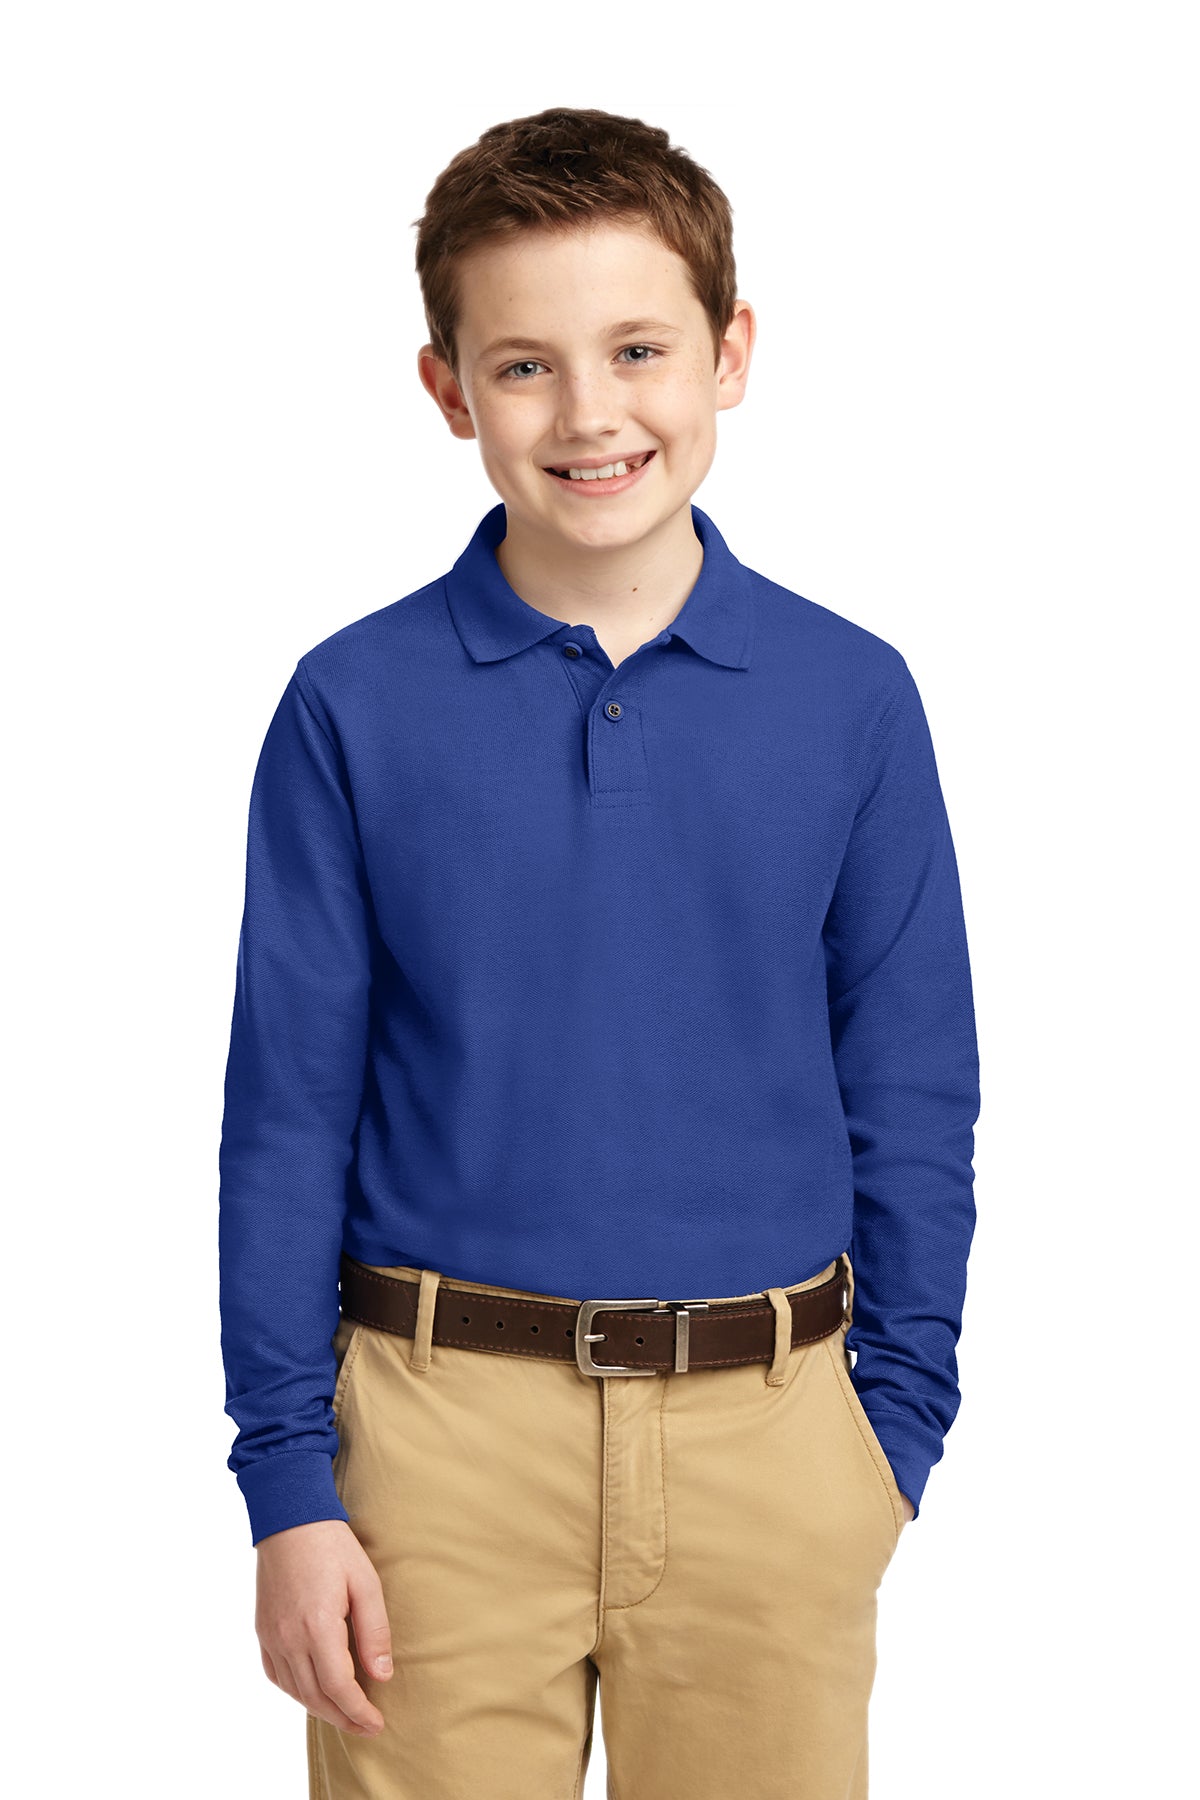 Windsor - YOUTH Long Sleeve Polo - ROYAL (Y500LS) - Southern Grace Creations